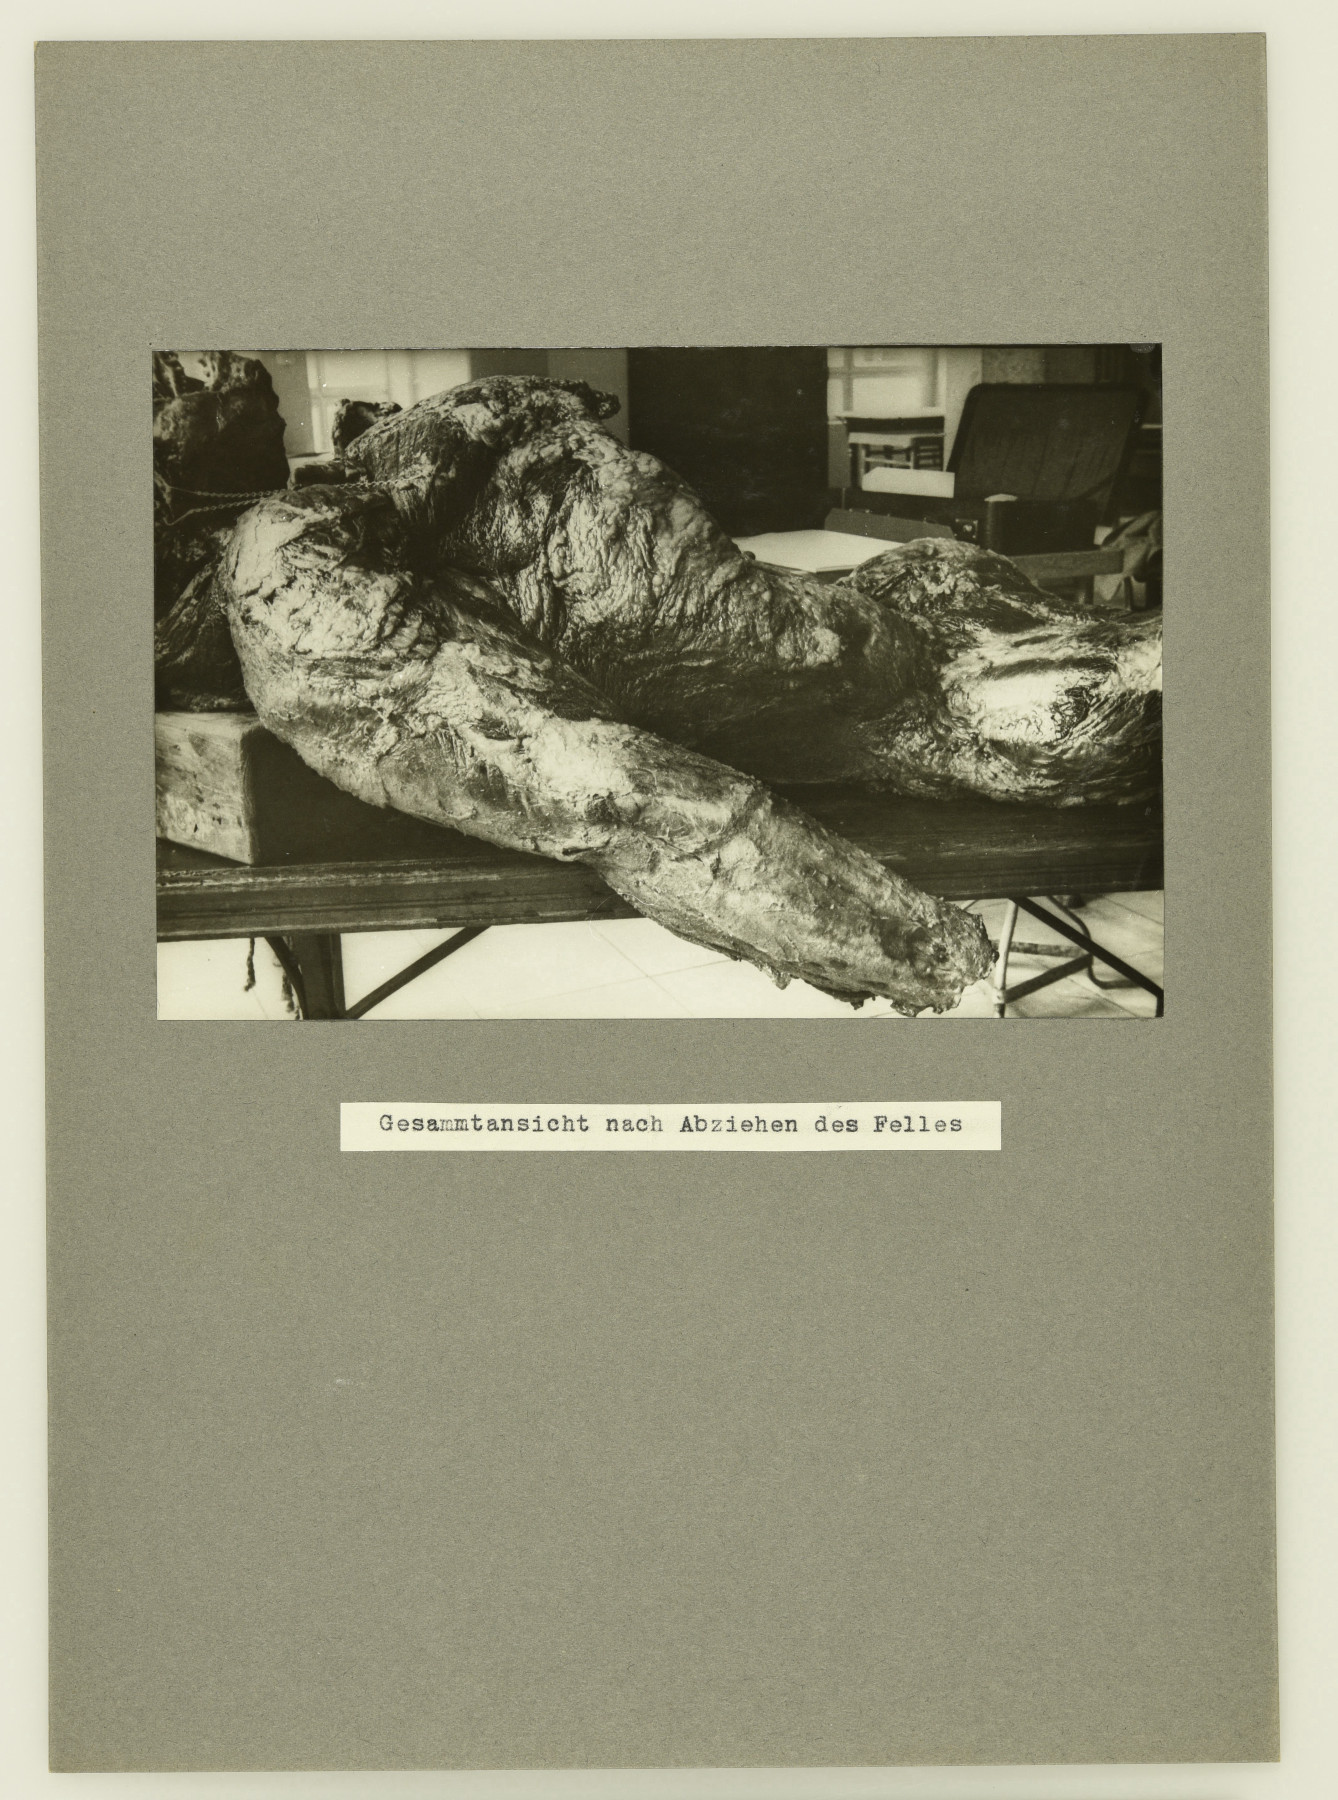 A black-and-white photo of a skinned gorilla torso from which the hands have been removed, lying on a table or a stretcher in an indoor space.